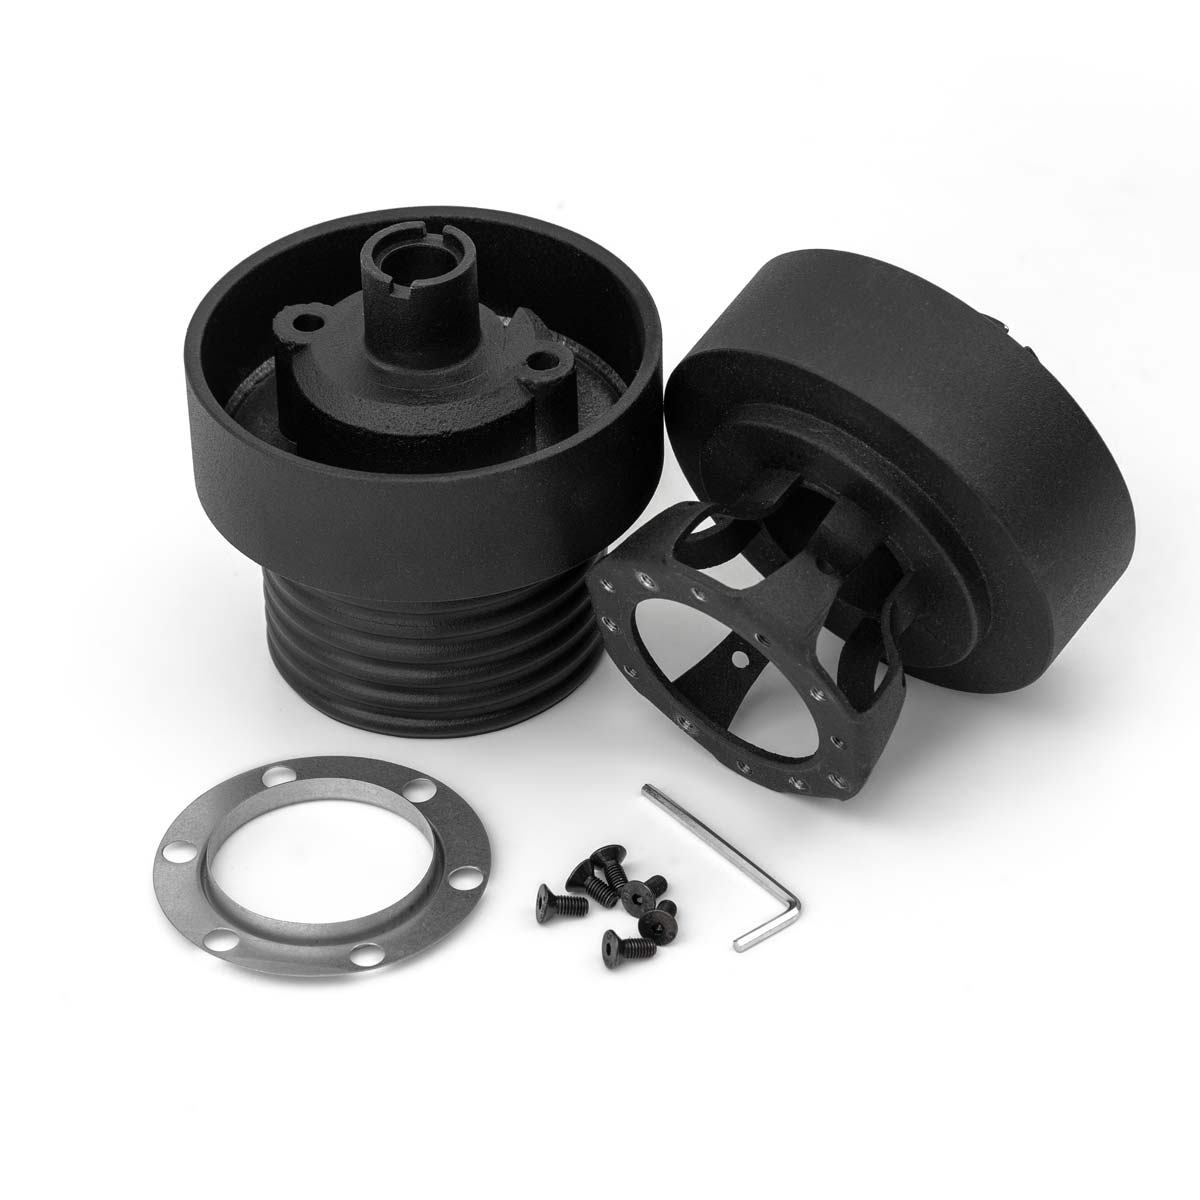 LUISI steering wheel hub BMW 6 series E24 up to 08/1983 (TÜV-compliant deformable / 6x74mm 6x70mm)